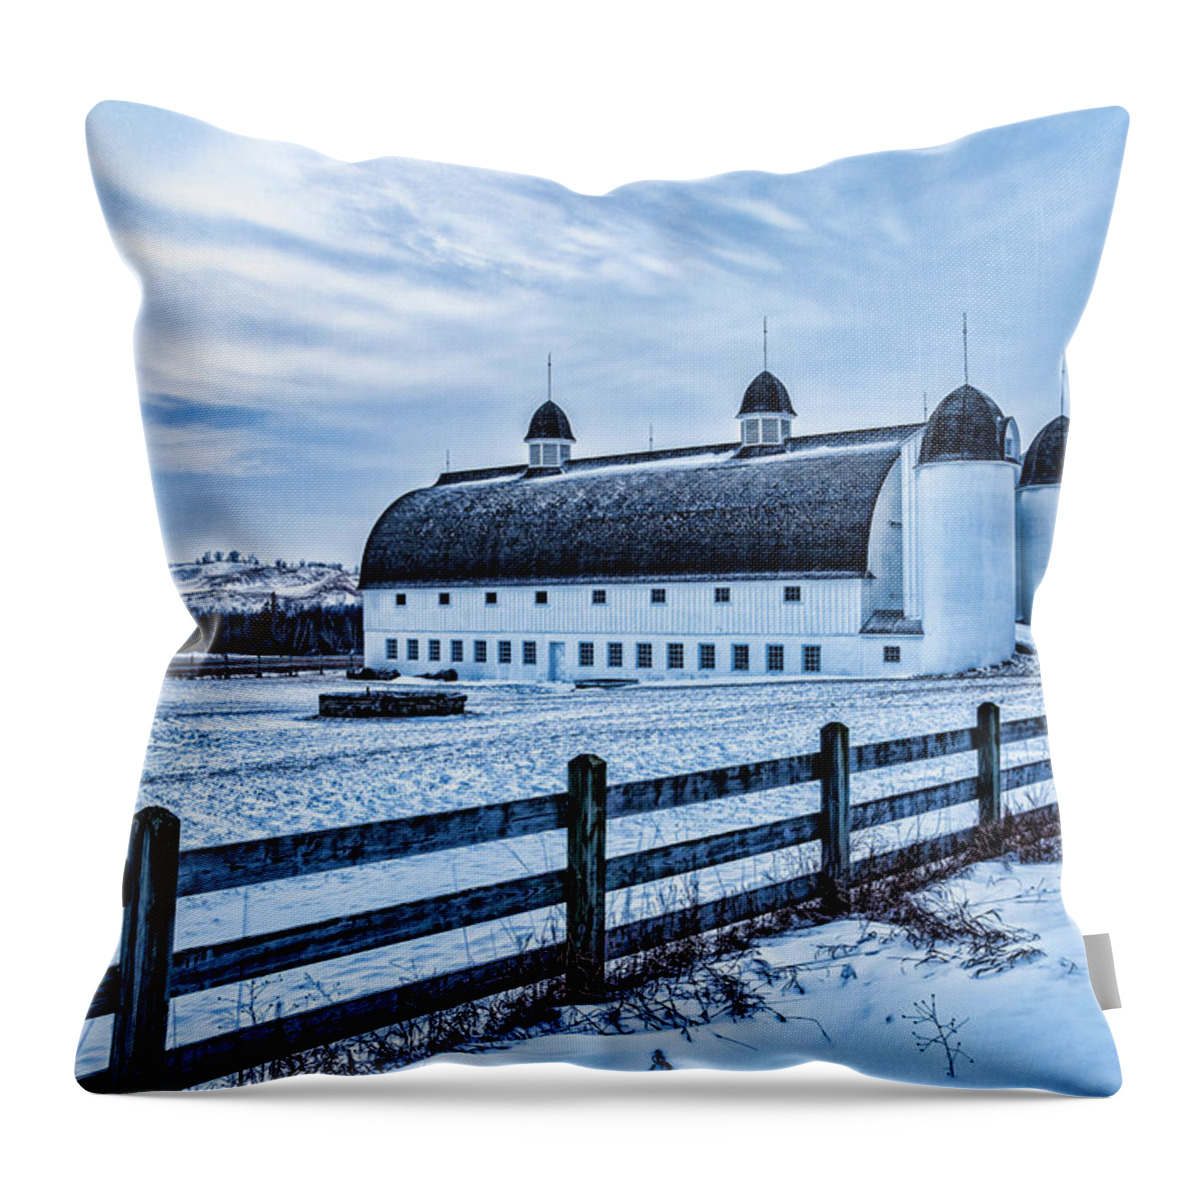 Clouds Throw Pillow featuring the photograph D. H. Day Barn Blue Hour by Joe Holley